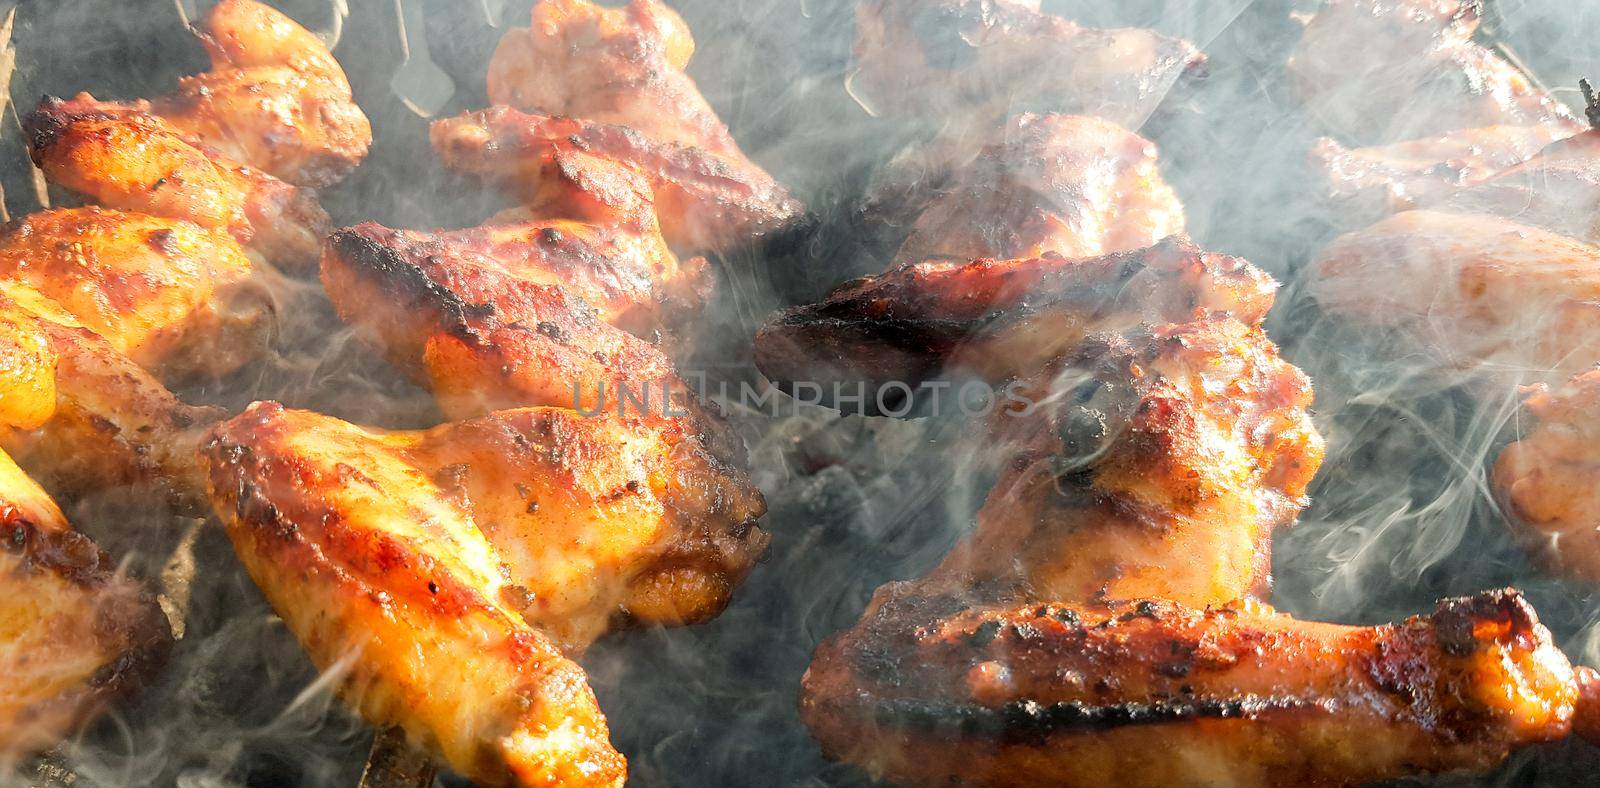 Delicious juicy grilled chicken wings outdoors in smoke. BBQ Chicken Cooking Process.